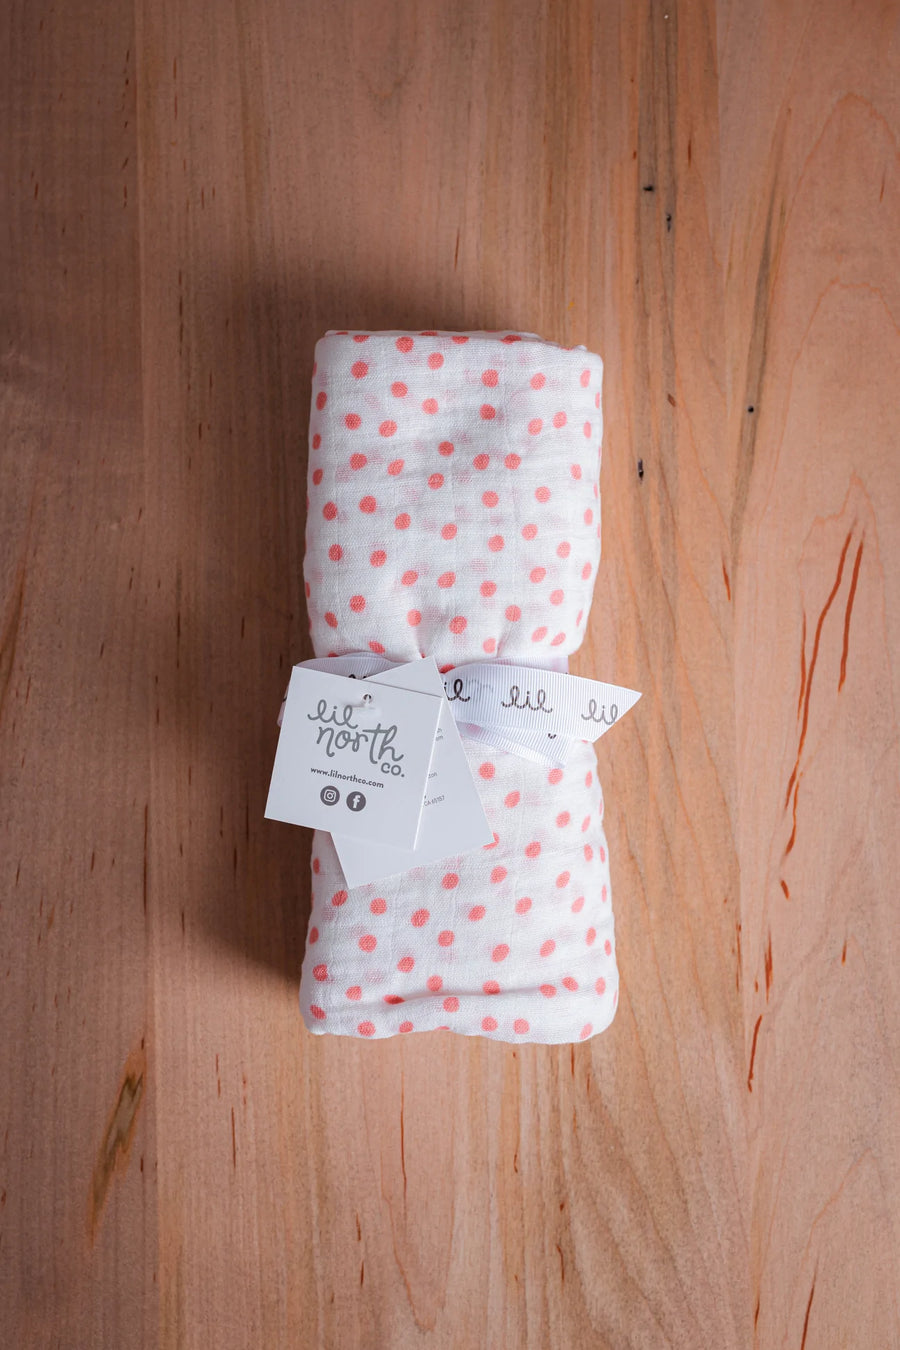 Lil North Co. | Muslin Swaddle Blanket - Blush Dots